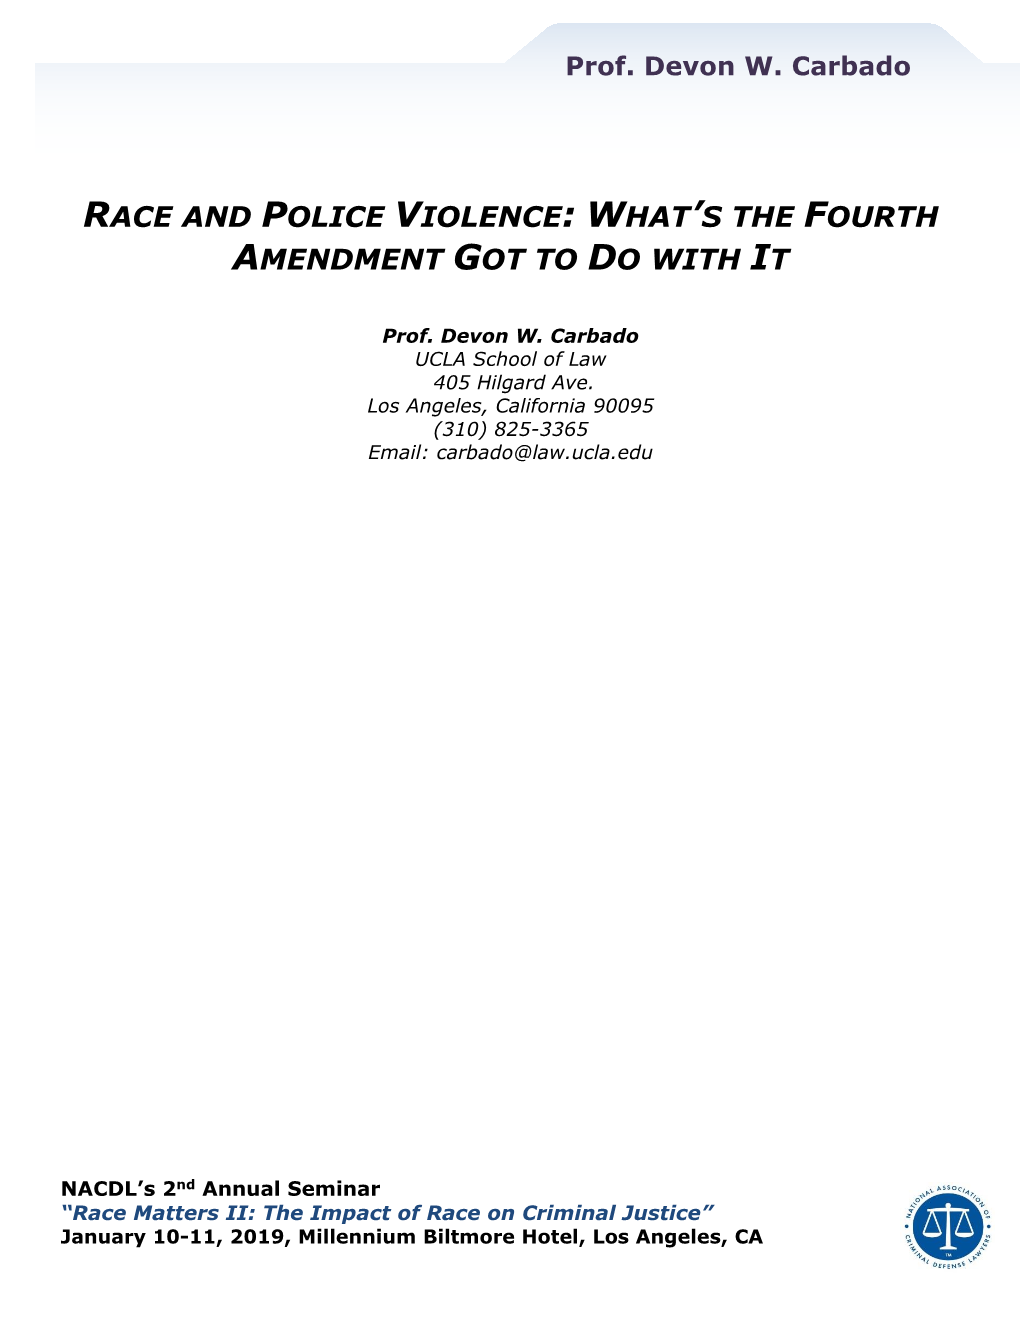 Race and Police Violence: What’S the Fourth Amendment Got to Do with It